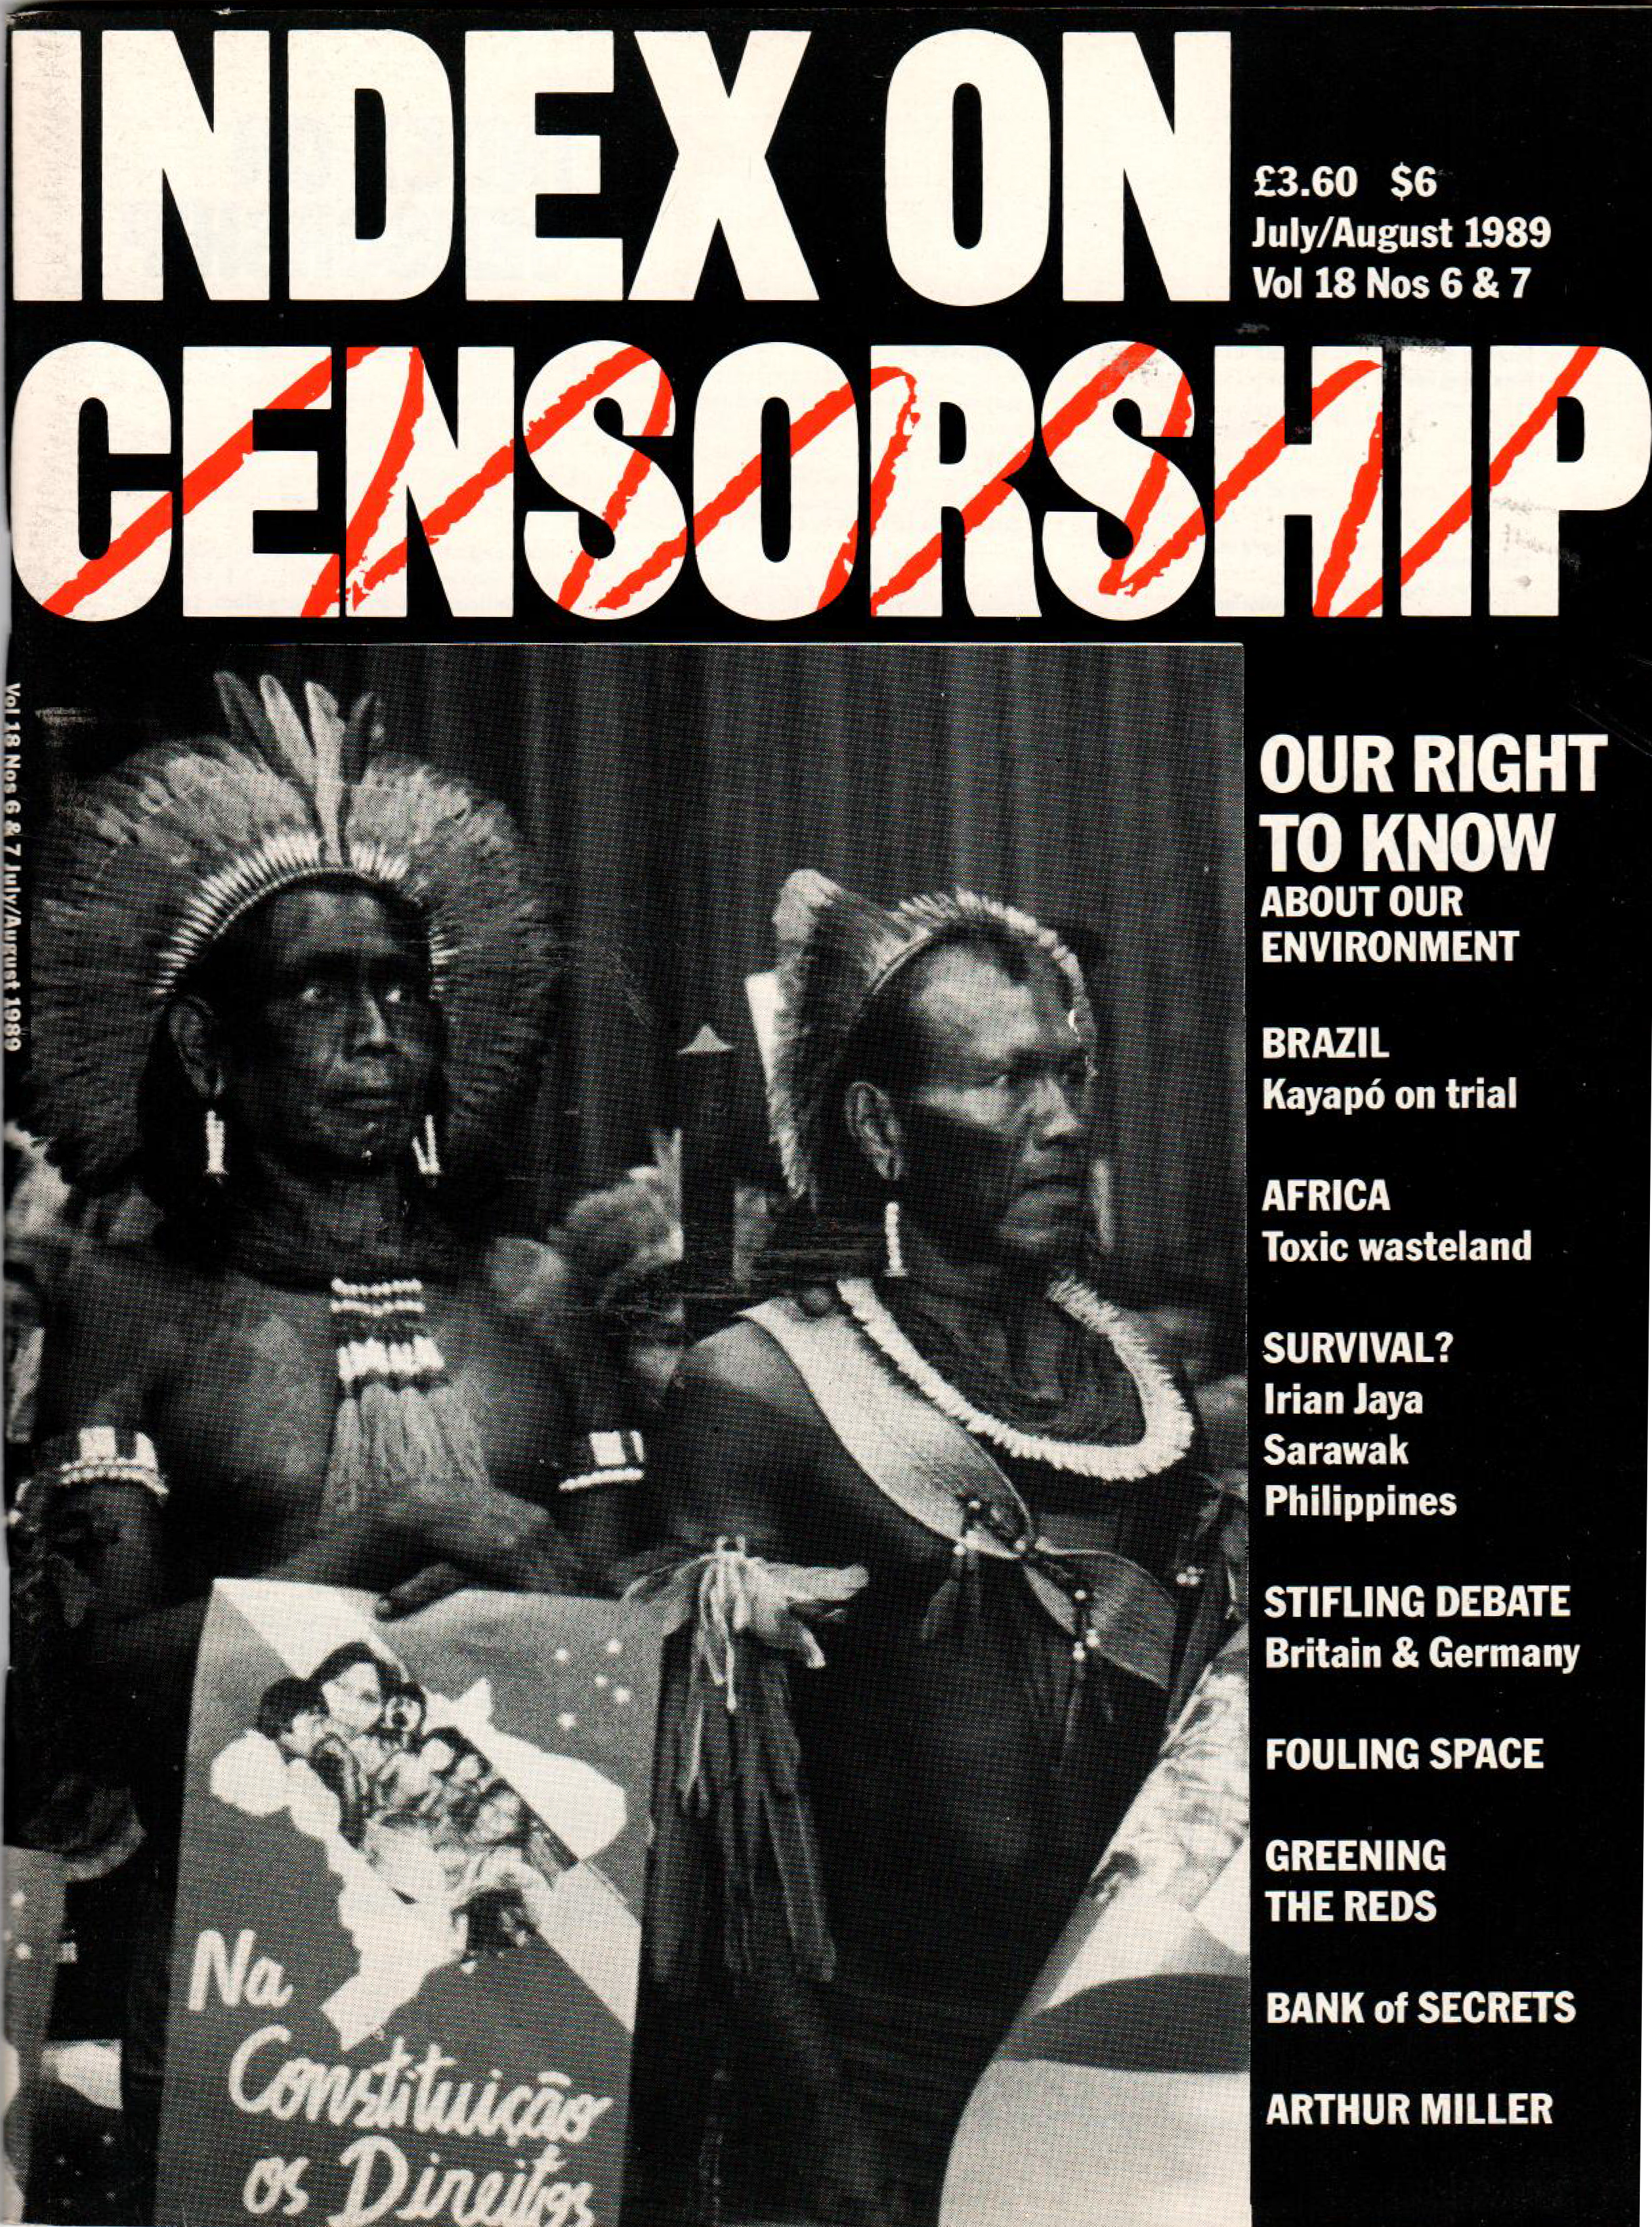 Our right to know about our environment, the July 1989 issue of Index on Censorship magazine.